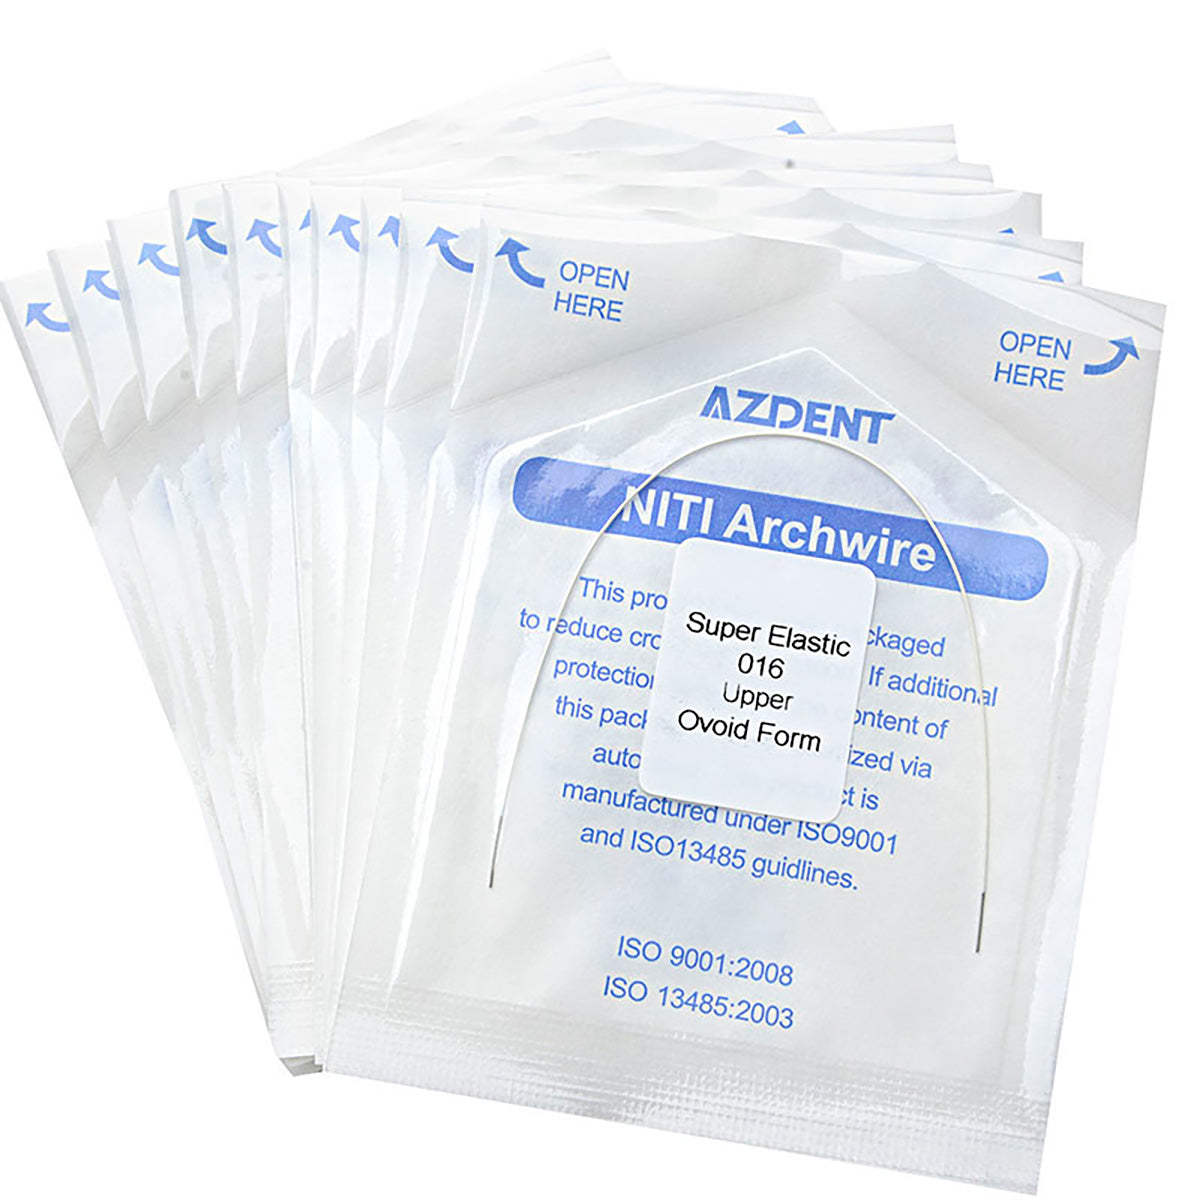 10 Packs AZDENT Archwire NiTi Super Elastic Colored Coated Ovoid Round 0.016 Upper 1pcs/Pack - azdentall.com